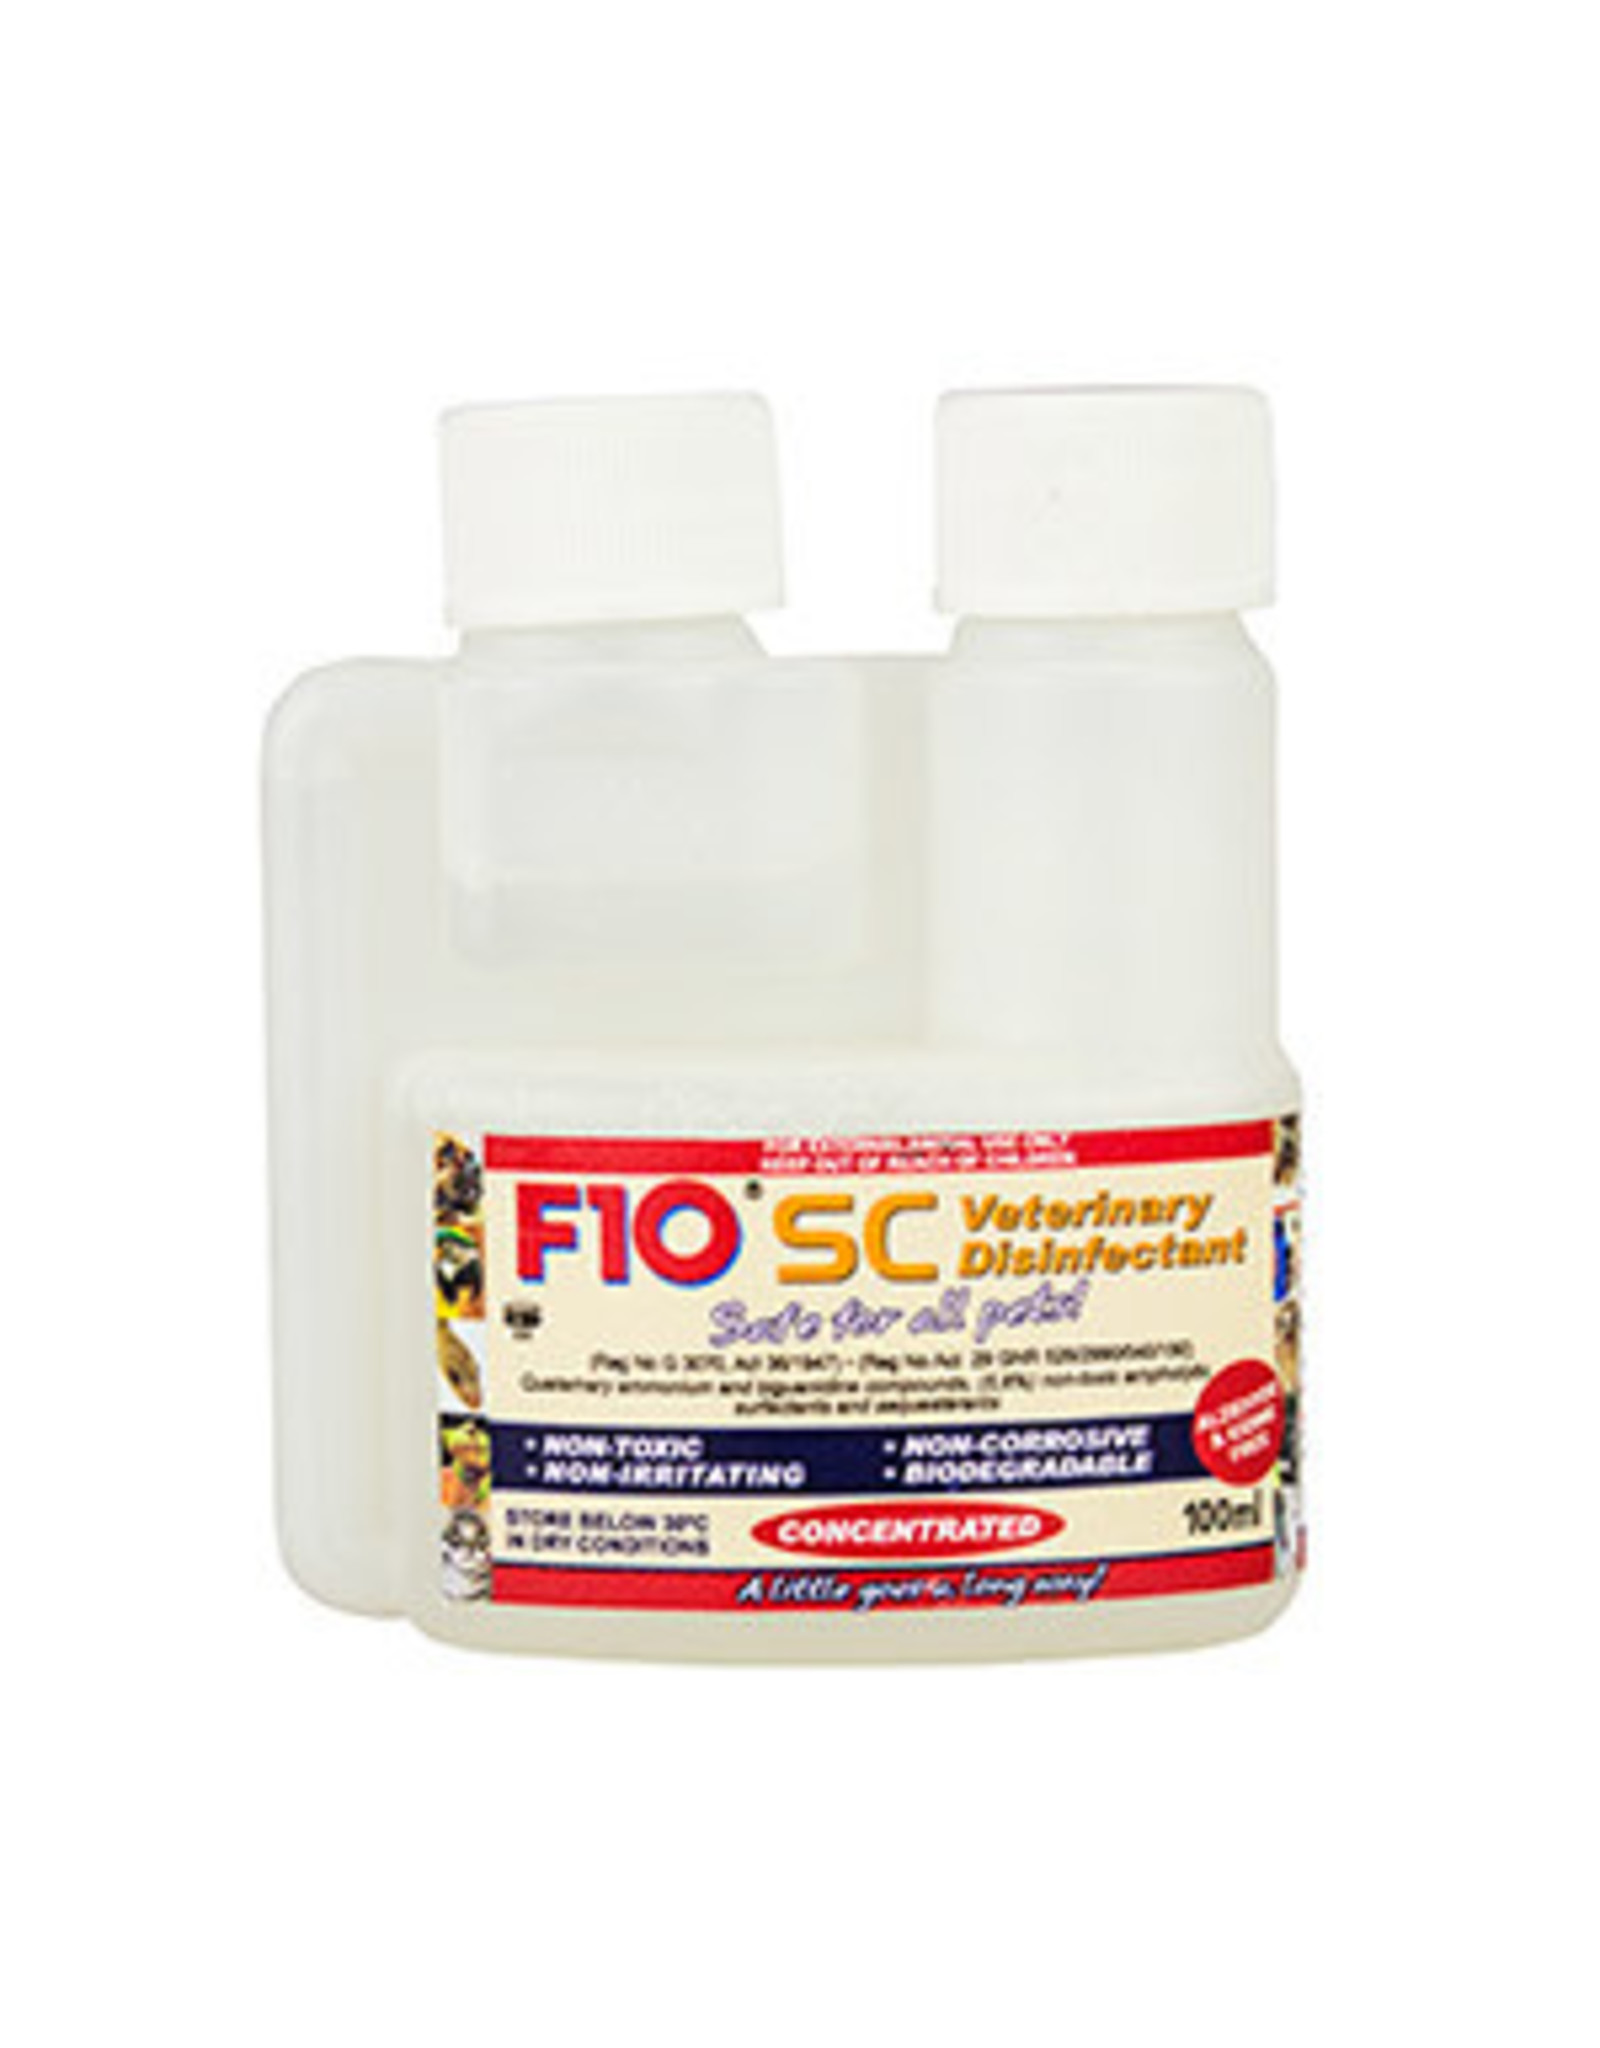 F10 F10 SC Veterinary Disinfectant 100ml (concentrate)